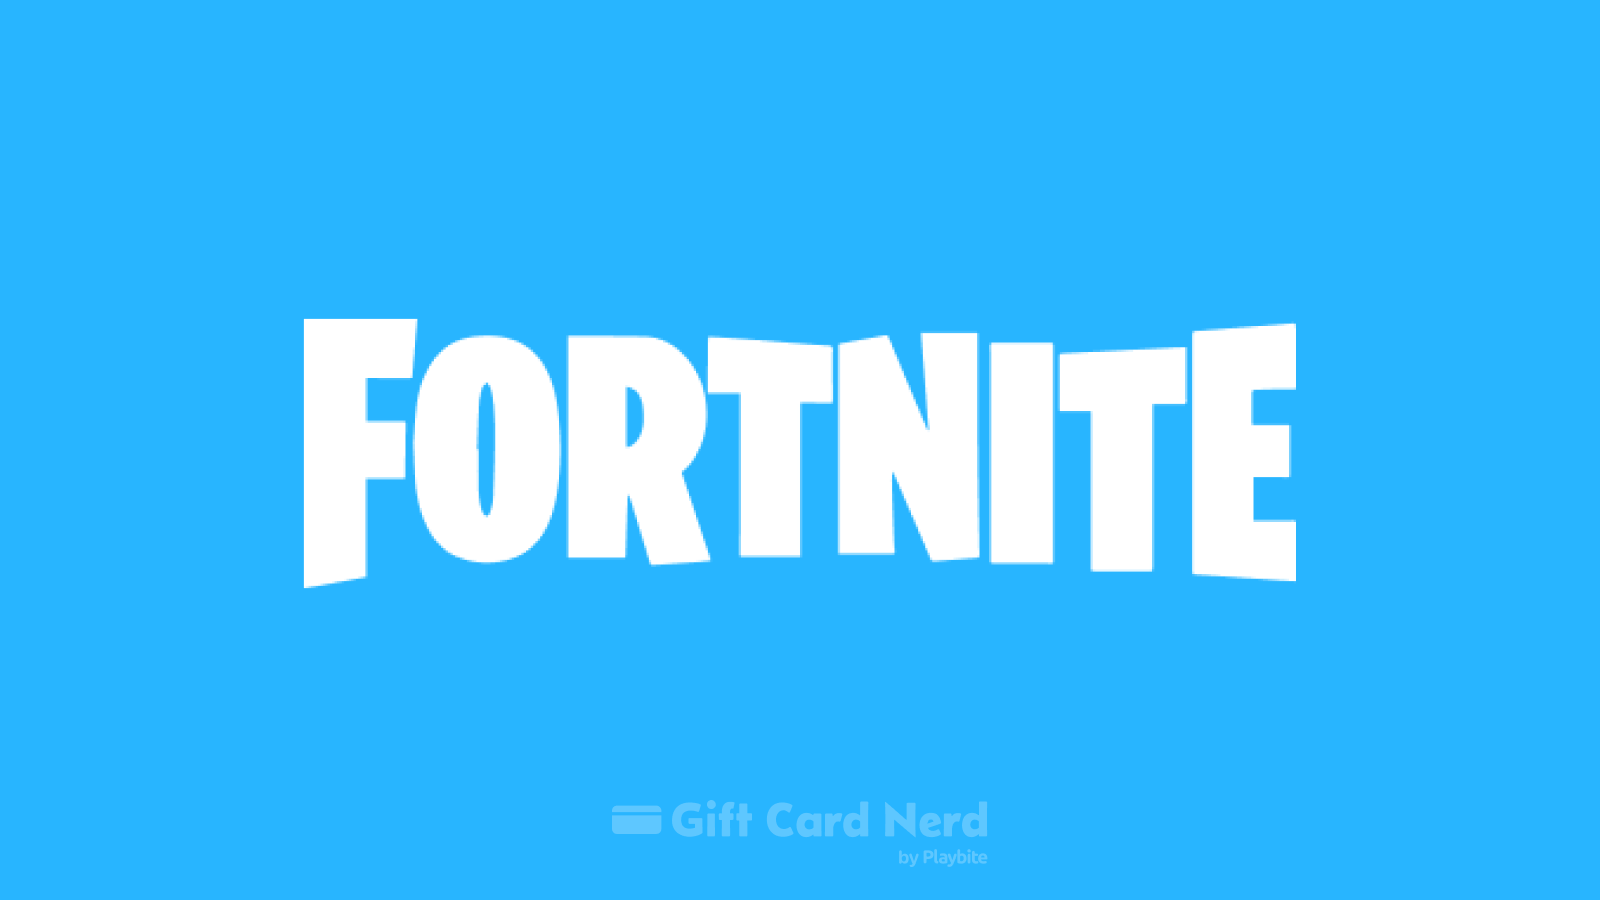 Can I Use a Fortnite Gift Card on PayPal?